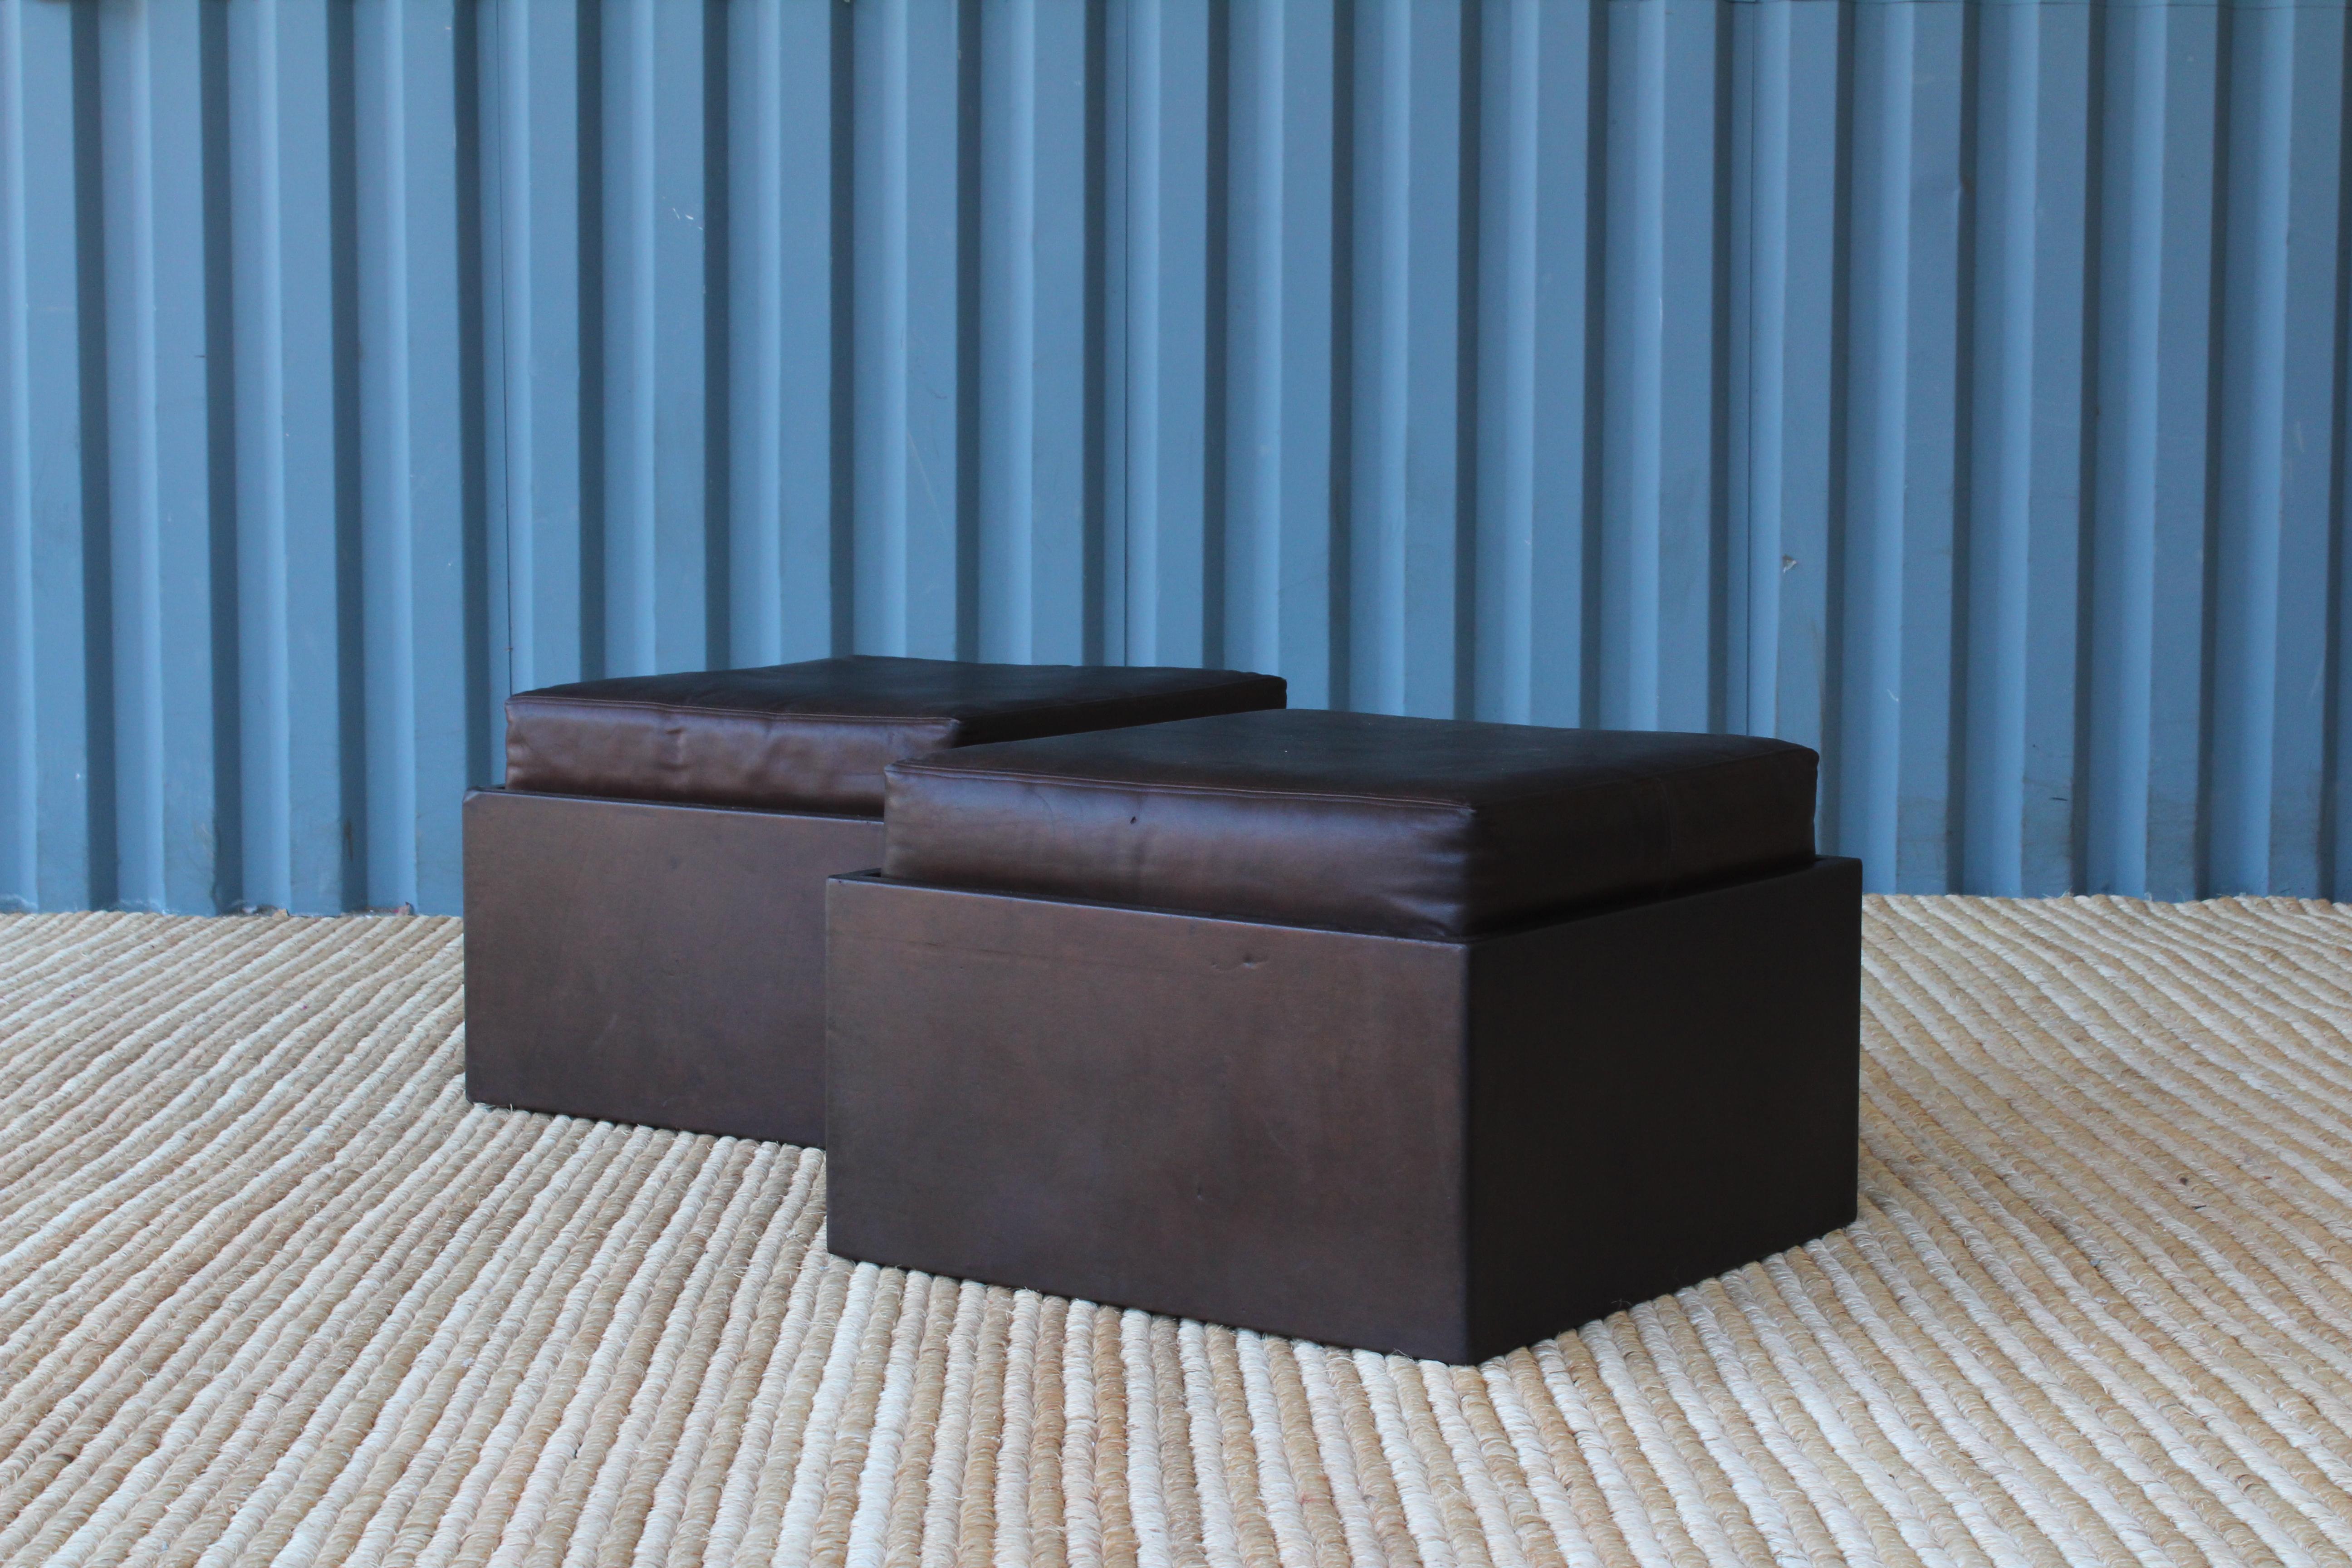 Pair of 1970s leather wrapped ottomans on rolling casters with removable cushions.